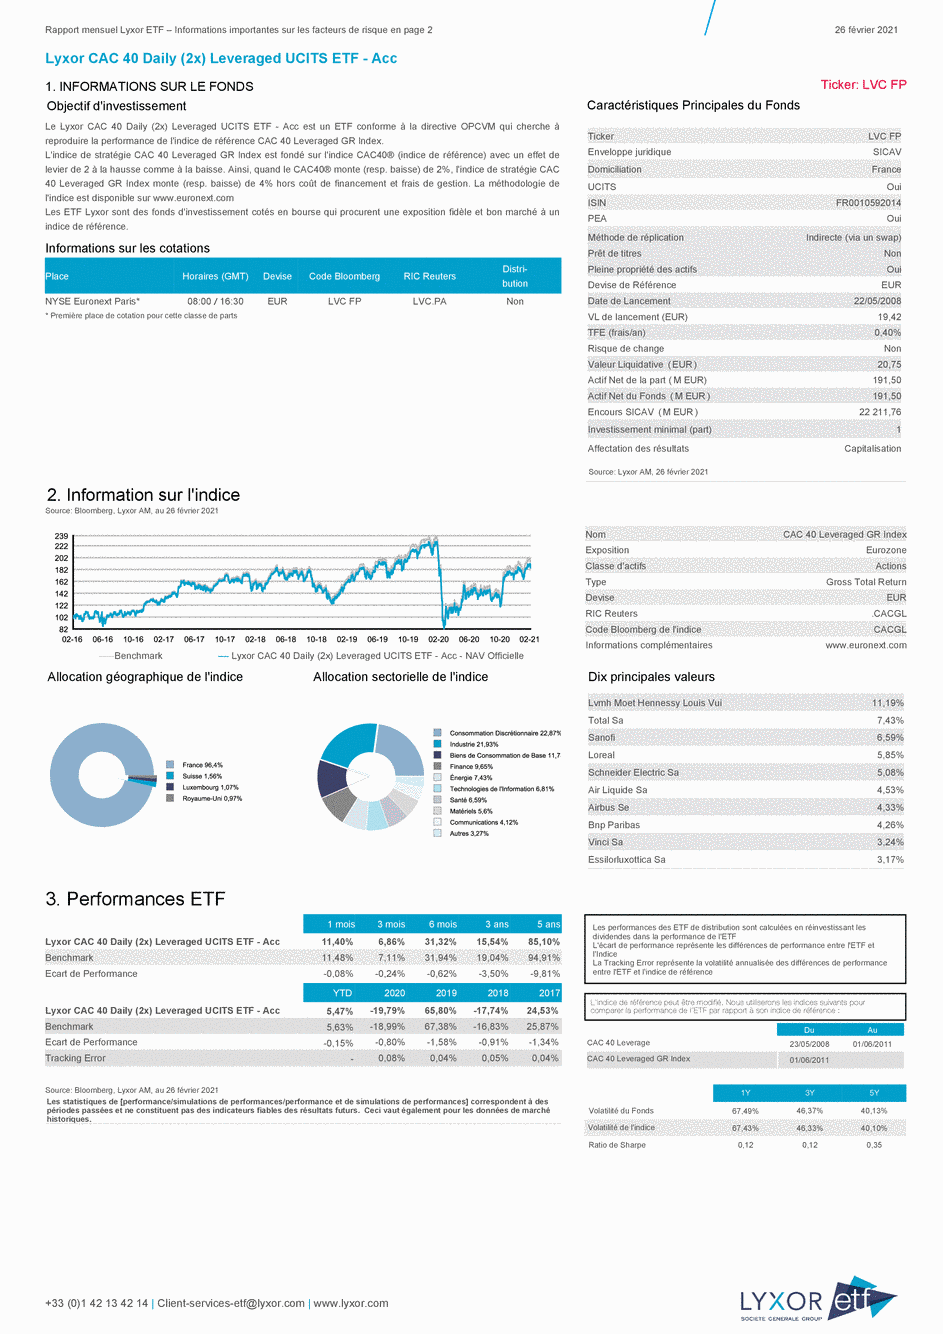 Reporting Lyxor CAC 40 Daily (2x) Leveraged UCITS ETF - Acc - 26/02/2021 - Français